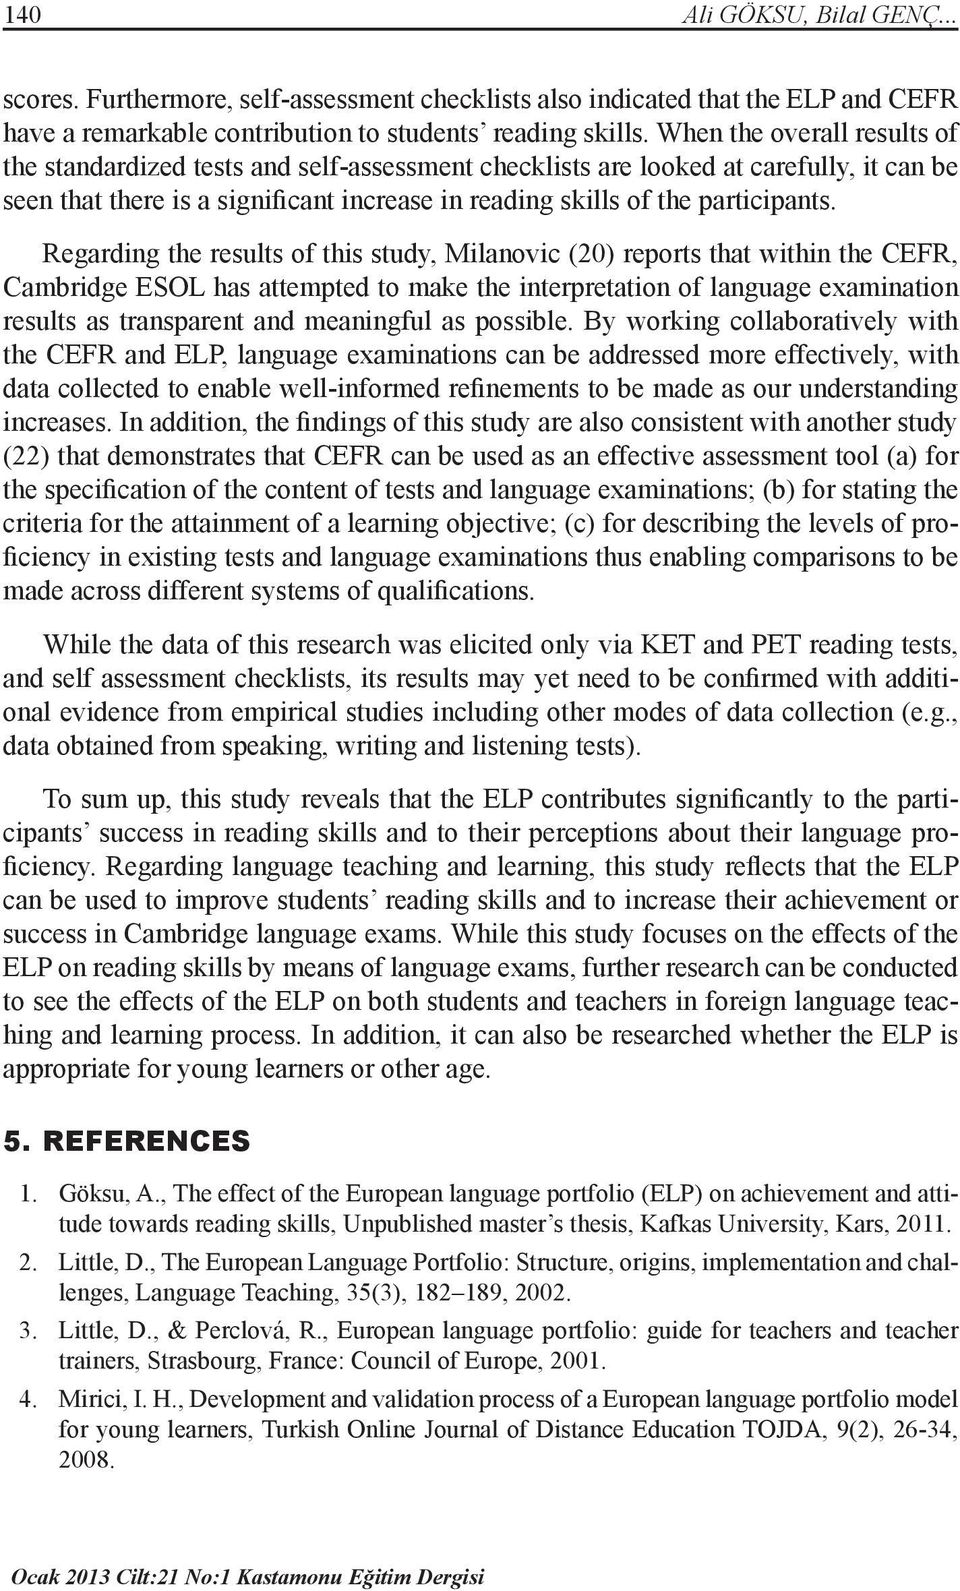 Regarding the results of this study, Milanovic (20) reports that within the CEFR, Cambridge ESOL has attempted to make the interpretation of language examination results as transparent and meaningful